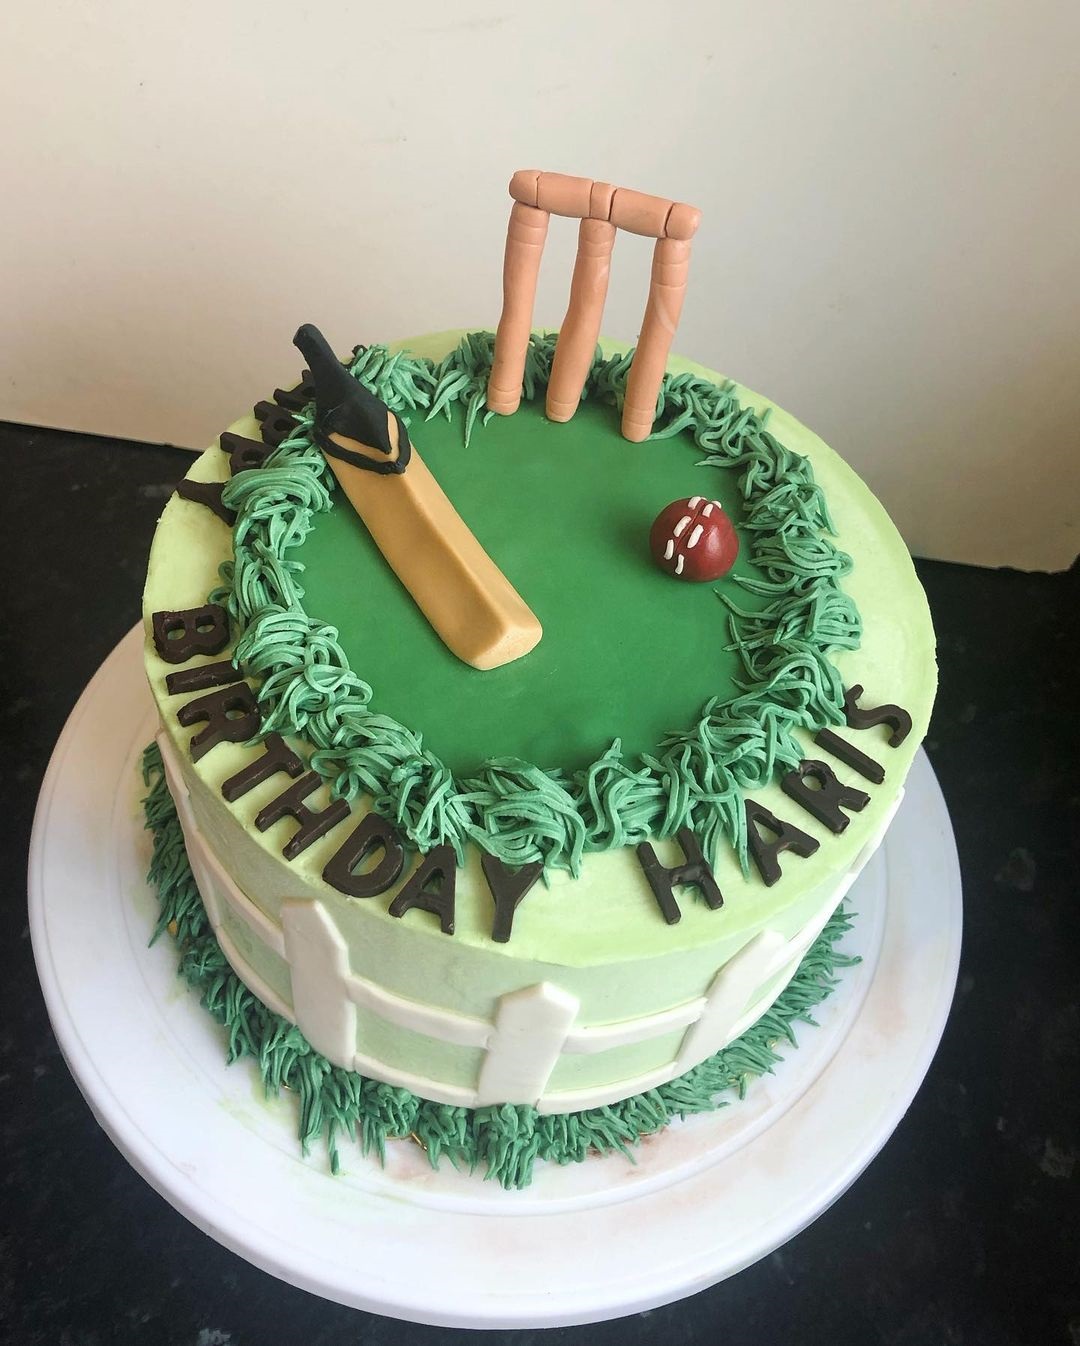 Cricket themed birthday cake for a... - Dream cakes by Aruni | Facebook